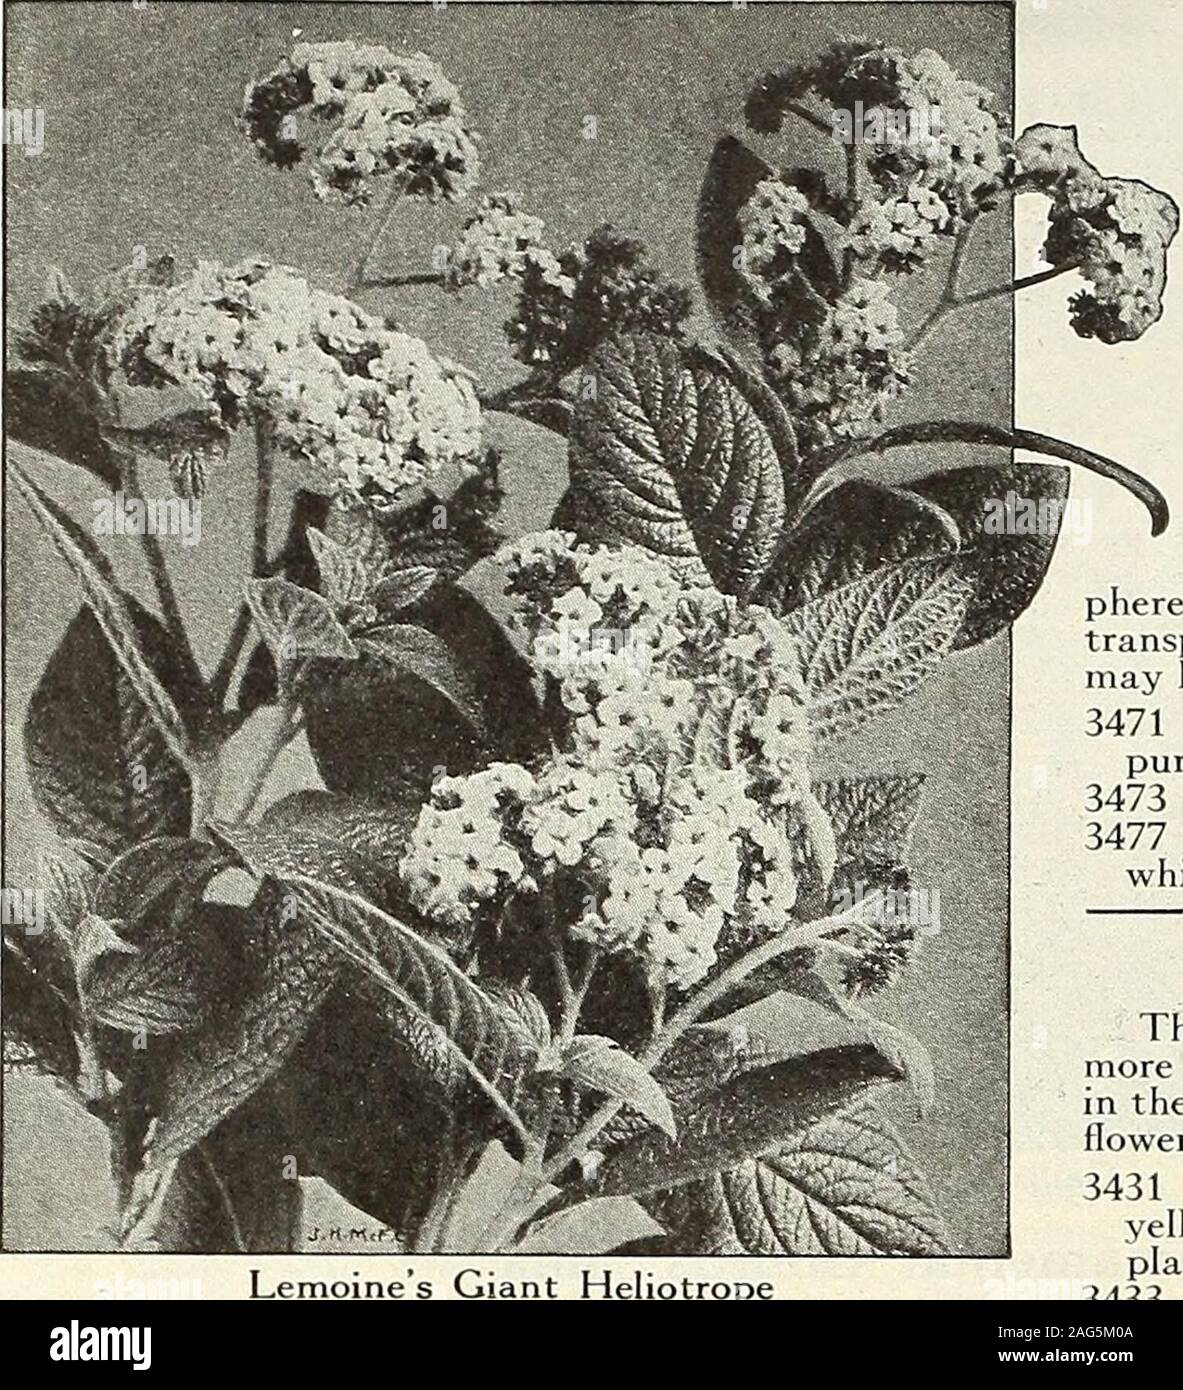 . Beckert's seeds. bunching with Sweet Peas, etc. 1J4 feet. Pkt. 5 cts., oz: 20 cts.3369 Erianthus Ravenna;. HP. Silvery plumes and violet-shaded leaves.8 to 10 feet. Pkt. 10 cts., oz. 65 cts.3371 Eulalia zebrina (Zebra Grass). HP. Leaves barred yellowish white. 4 feet.Pkt. 10 cts. 3375 Gynerium argenteum (Pampas Grass). HP. Beautiful, tall silvery plumes.8 to 10 feet. Pkt. 10 cts., oz. 80 cts. 3382 Pennisetum villosum (longistylum). HA. Known as Fountain Grass;greenish white plumes. 2x/i feet. Pkt. 10 cts., oz. 65 cts. 3383 Pennisetum Ruppelii (Purple Fountain Grass). HA. Purple plumes. 2Yi f Stock Photo